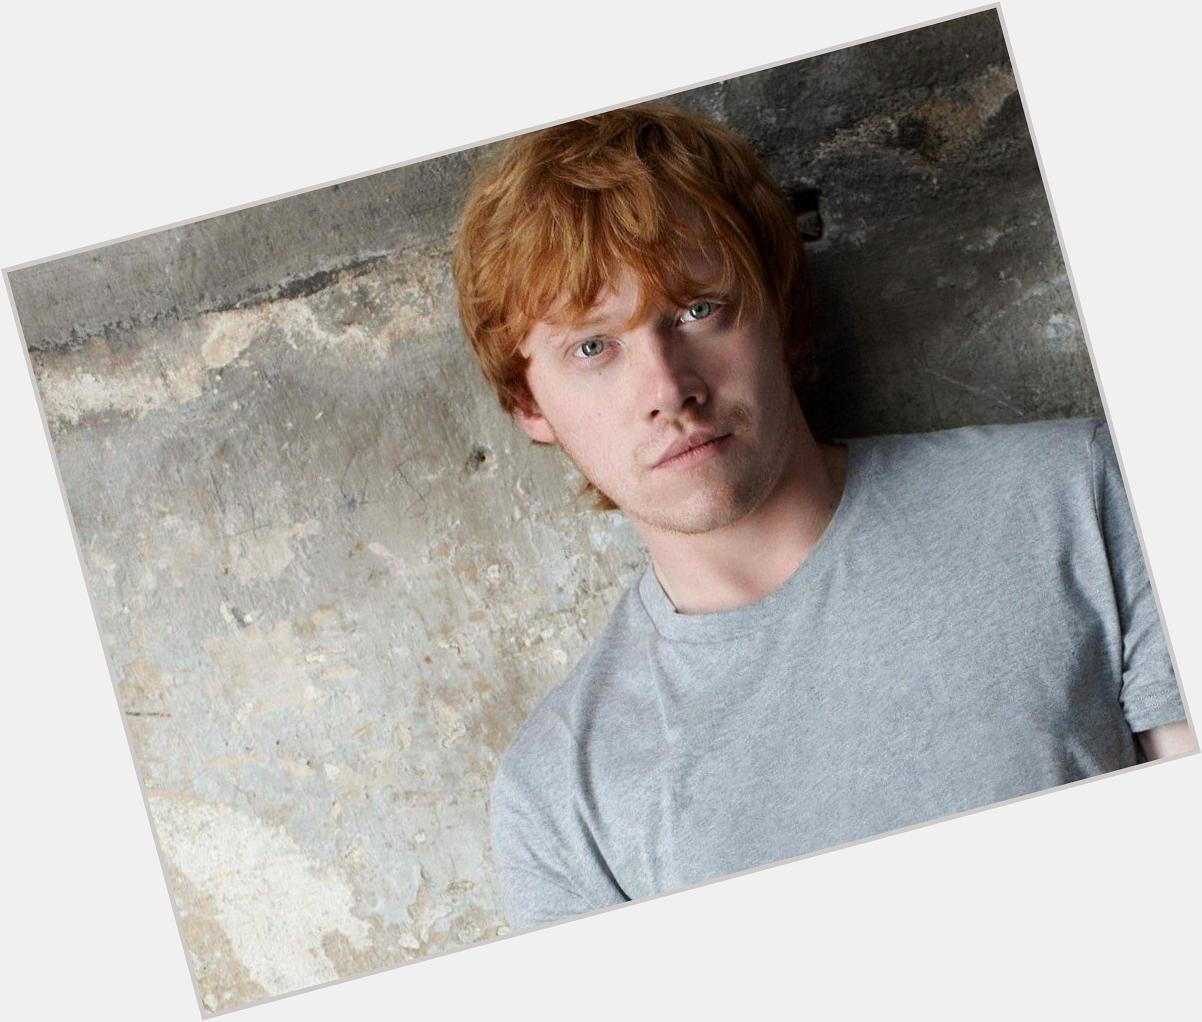 Happy birthday to Rupert Grint! The Harry Potter star turns 27. 